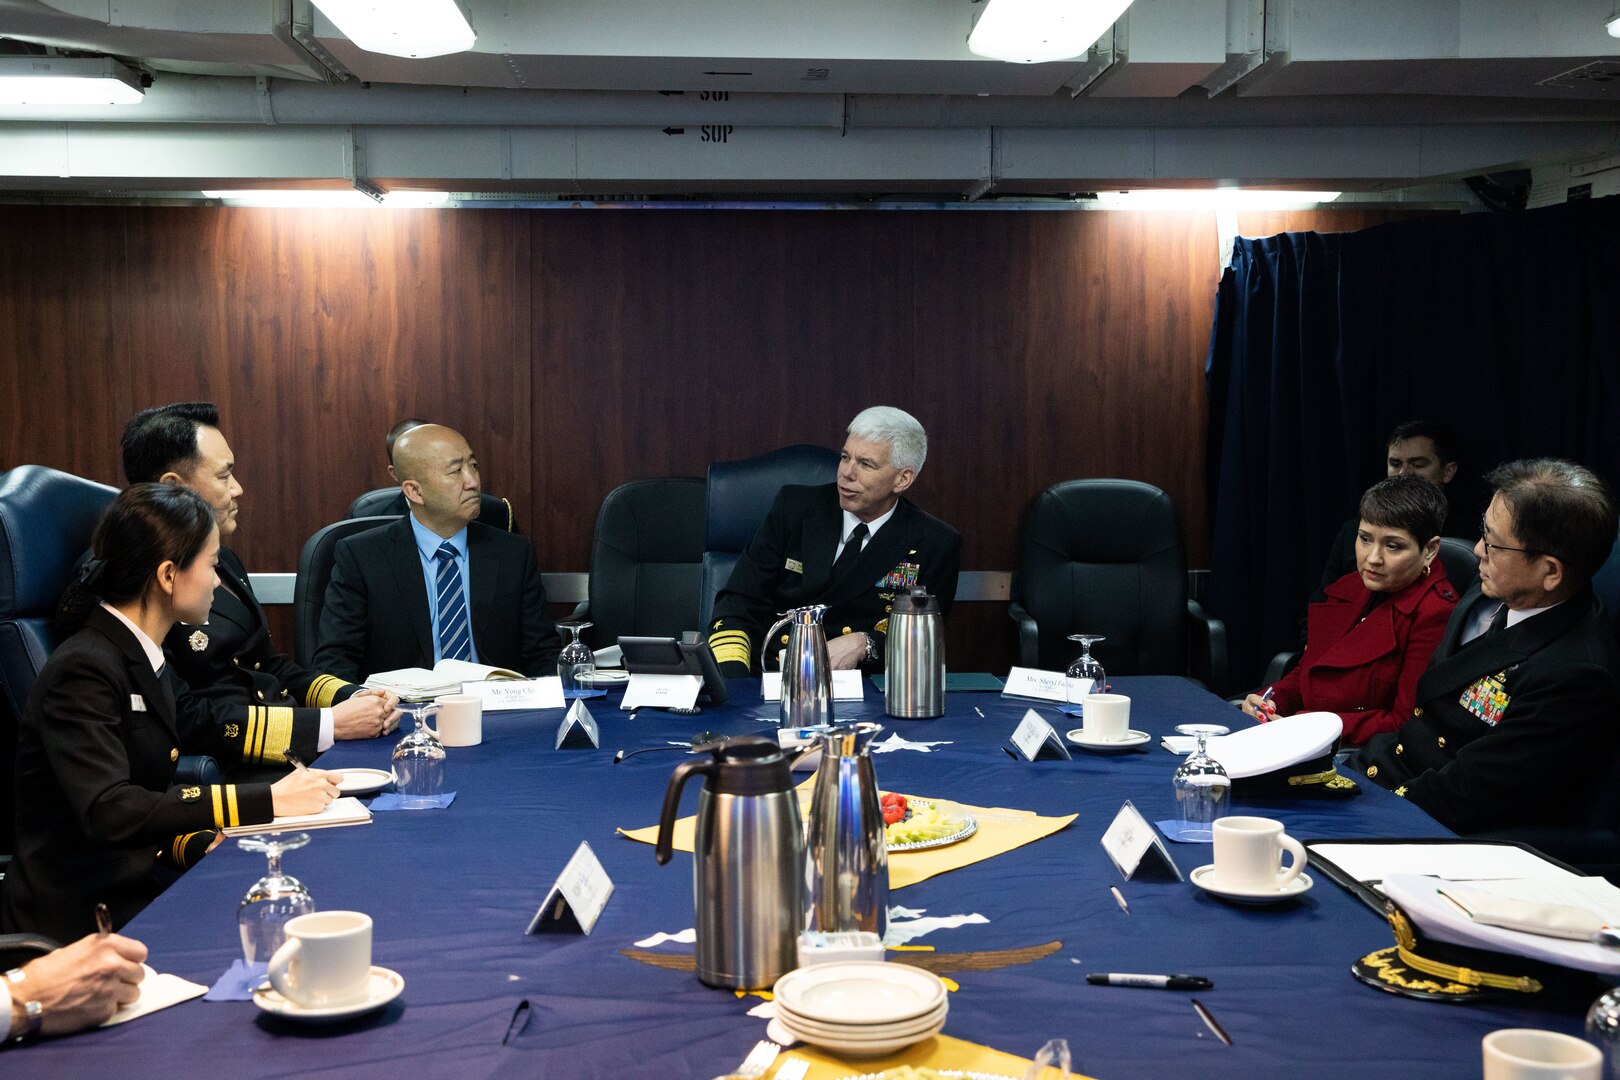 230222-N-GR847-2037 YOKOSUKA, Japan (Feb. 22, 2023) - Commander, U.S. 7th Fleet, Vice Adm. Karl Thomas, speaks during a tri-lateral meeting with Commander, Japan Maritime Self-Defense Force Self-Defense Fleet, Vice Adm. SAITO Akira, and Republic of Korea Navy Fleet Commander, Vice Adm. Kim Myung-soo, aboard U.S. 7th Fleet flagship USS Blue Ridge (LCC 19), Feb. 22. 7th Fleet is the U.S. Navy’s largest forward-deployed numbered fleet and routinely interacts and operates with Allies and partners in preserving a free and open Indo-Pacific region. (U.S. Navy photo by Mass Communication Specialist 1st Class Reymundo A. Villegas III)